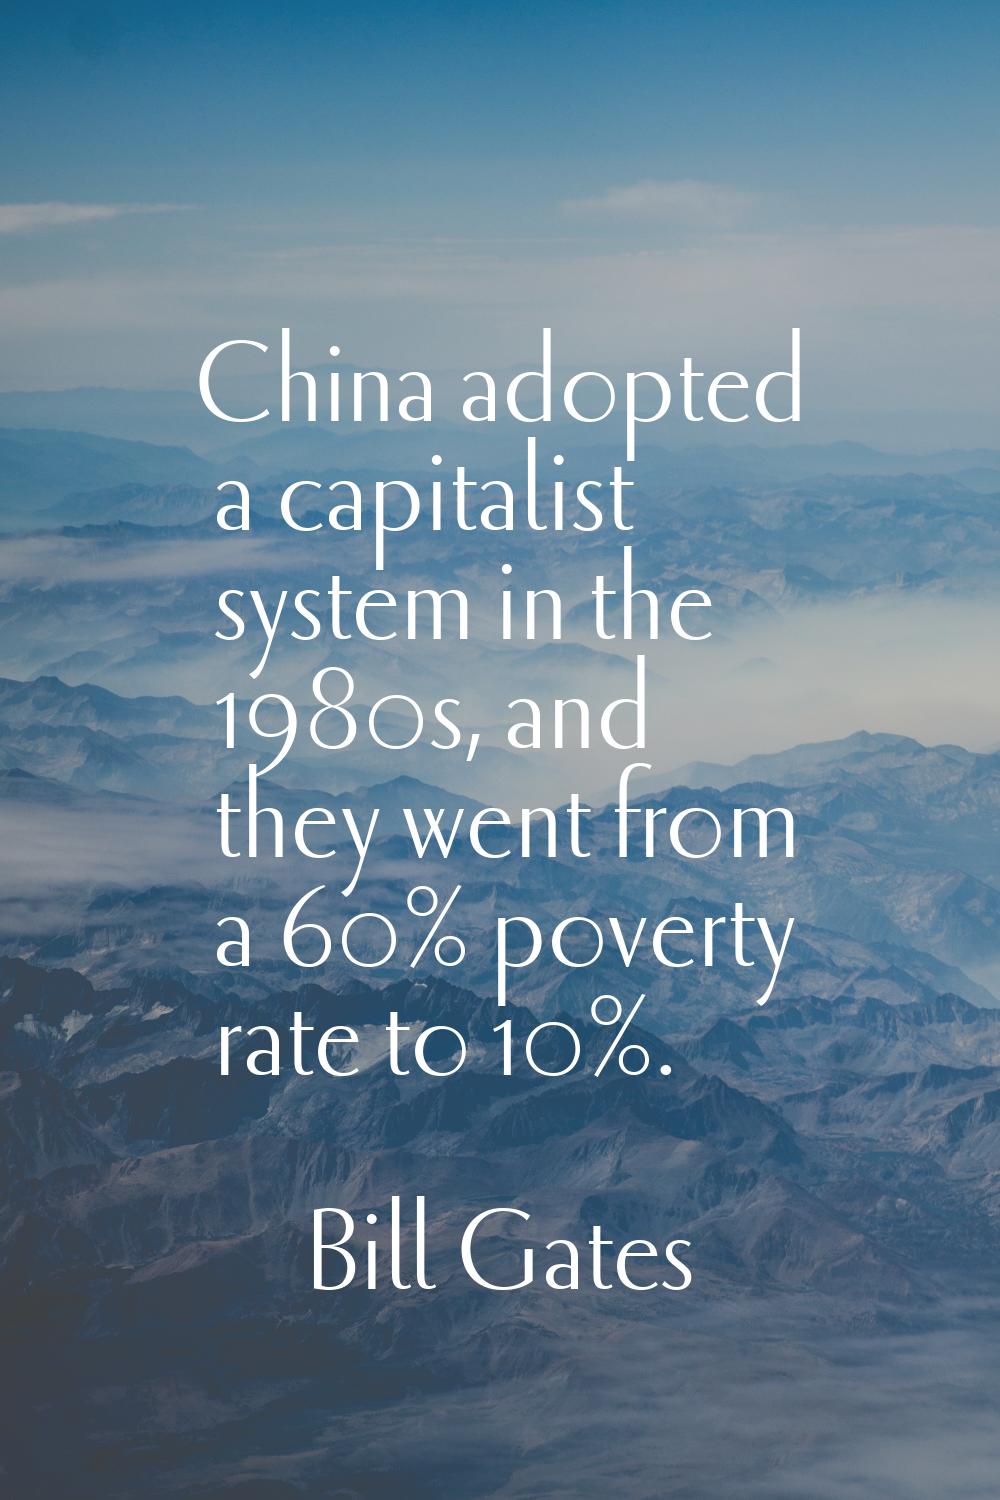 China adopted a capitalist system in the 1980s, and they went from a 60% poverty rate to 10%.